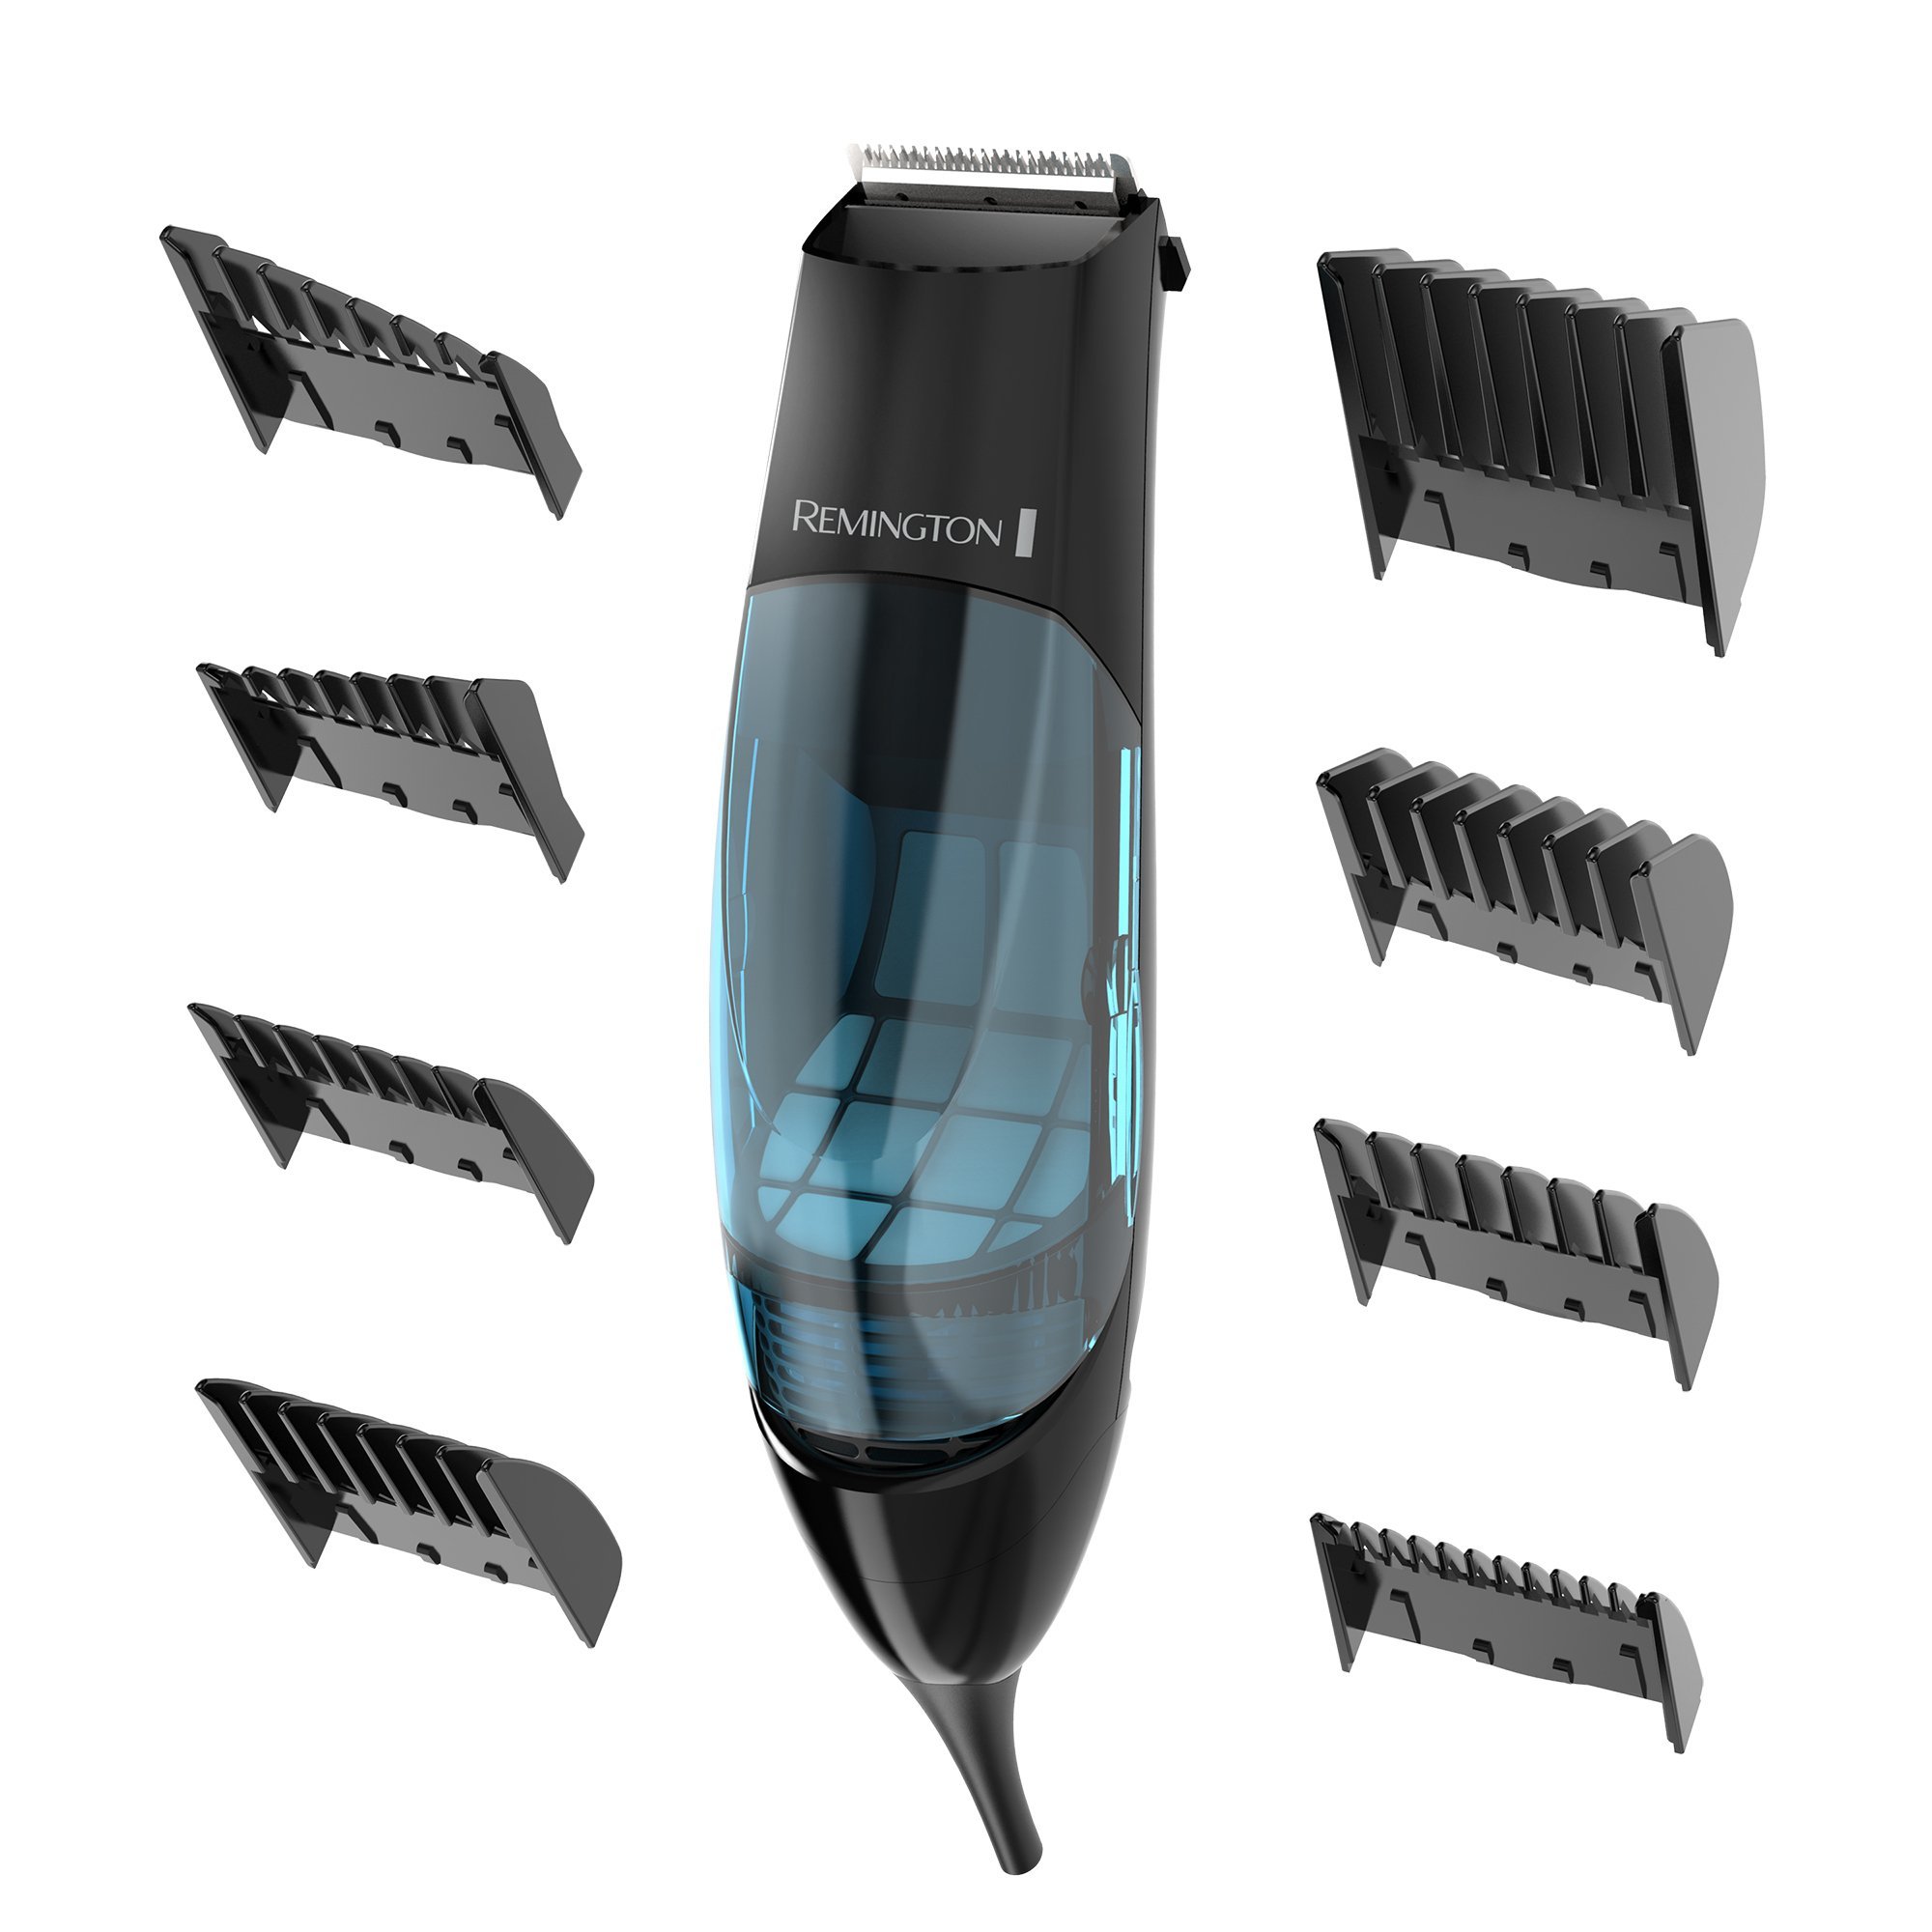 Remington Vacuum Haircut Kit, Vacuum Beard Trimmer, Hair Clippers for Men with Removable Hair Chamber and Dual Motor Power (18 pieces)